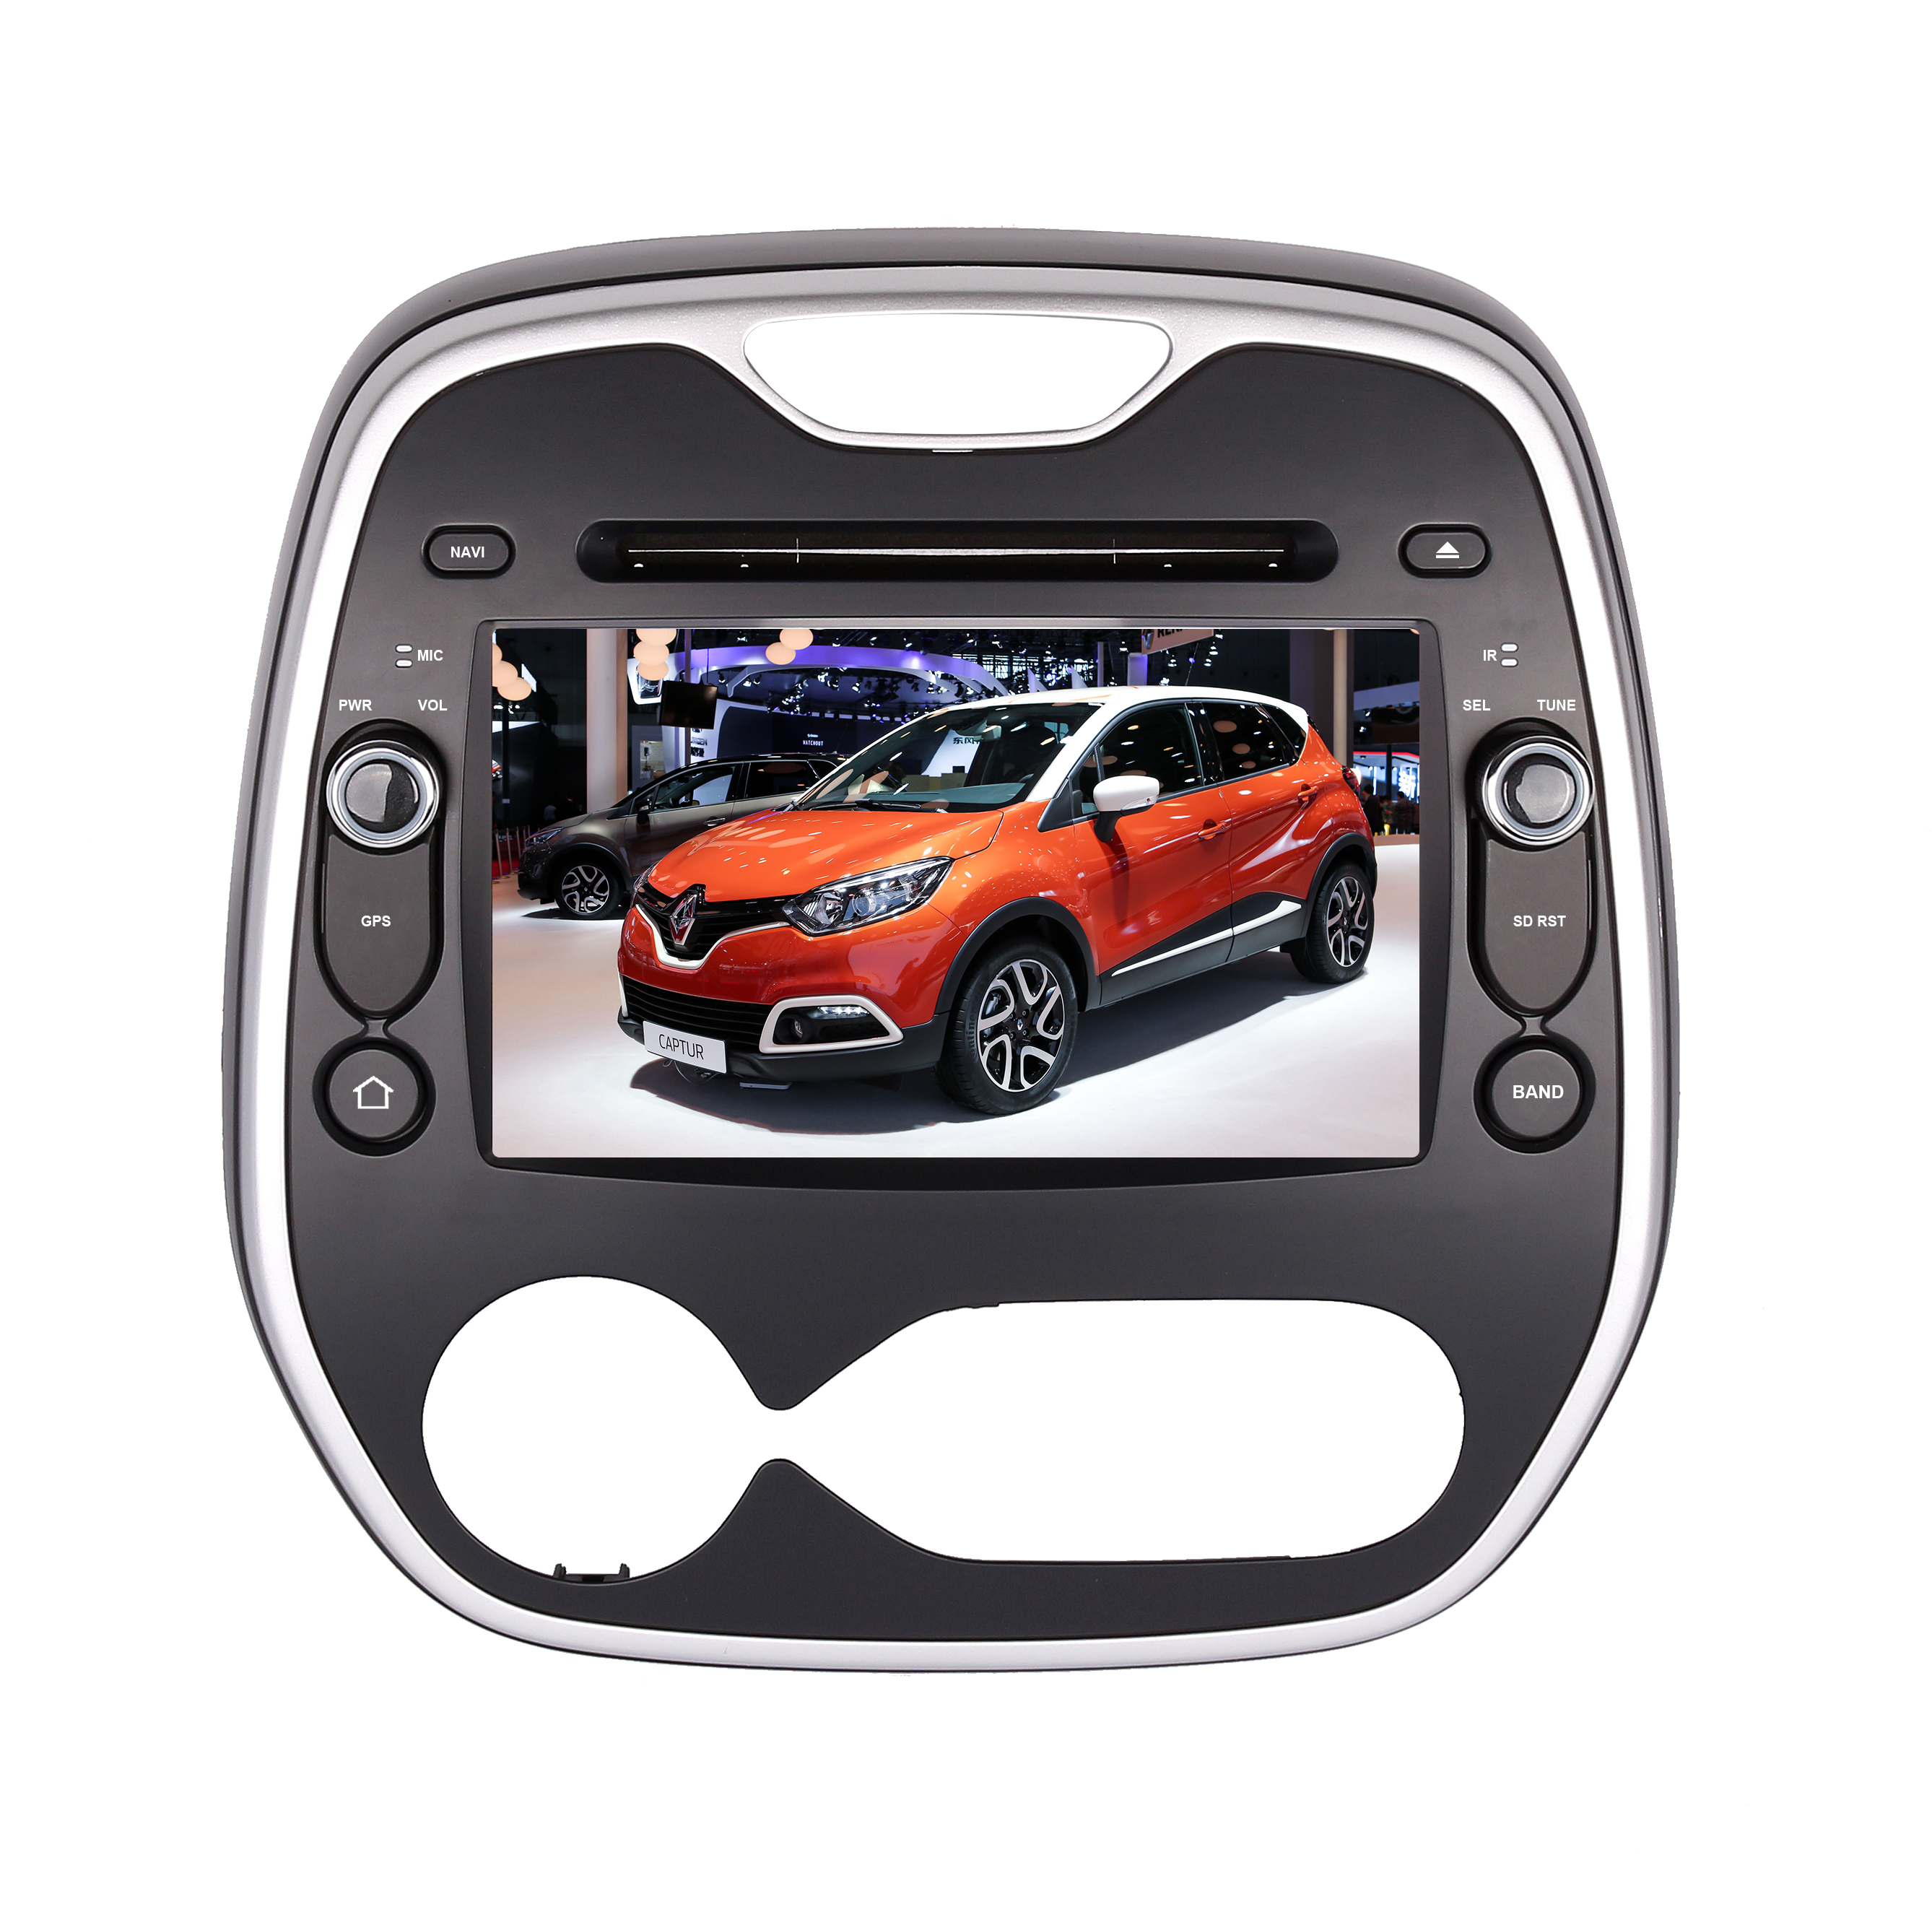 Renault Captur /CLIO /Samsung QM3 2011 Auto A/C 9'' HD Touch Screen Android 6.0/7.1 Car PC car stereo radio Auto GPS Navigation BT Wifi Mirror link Eight/Quad Cores multimedia players